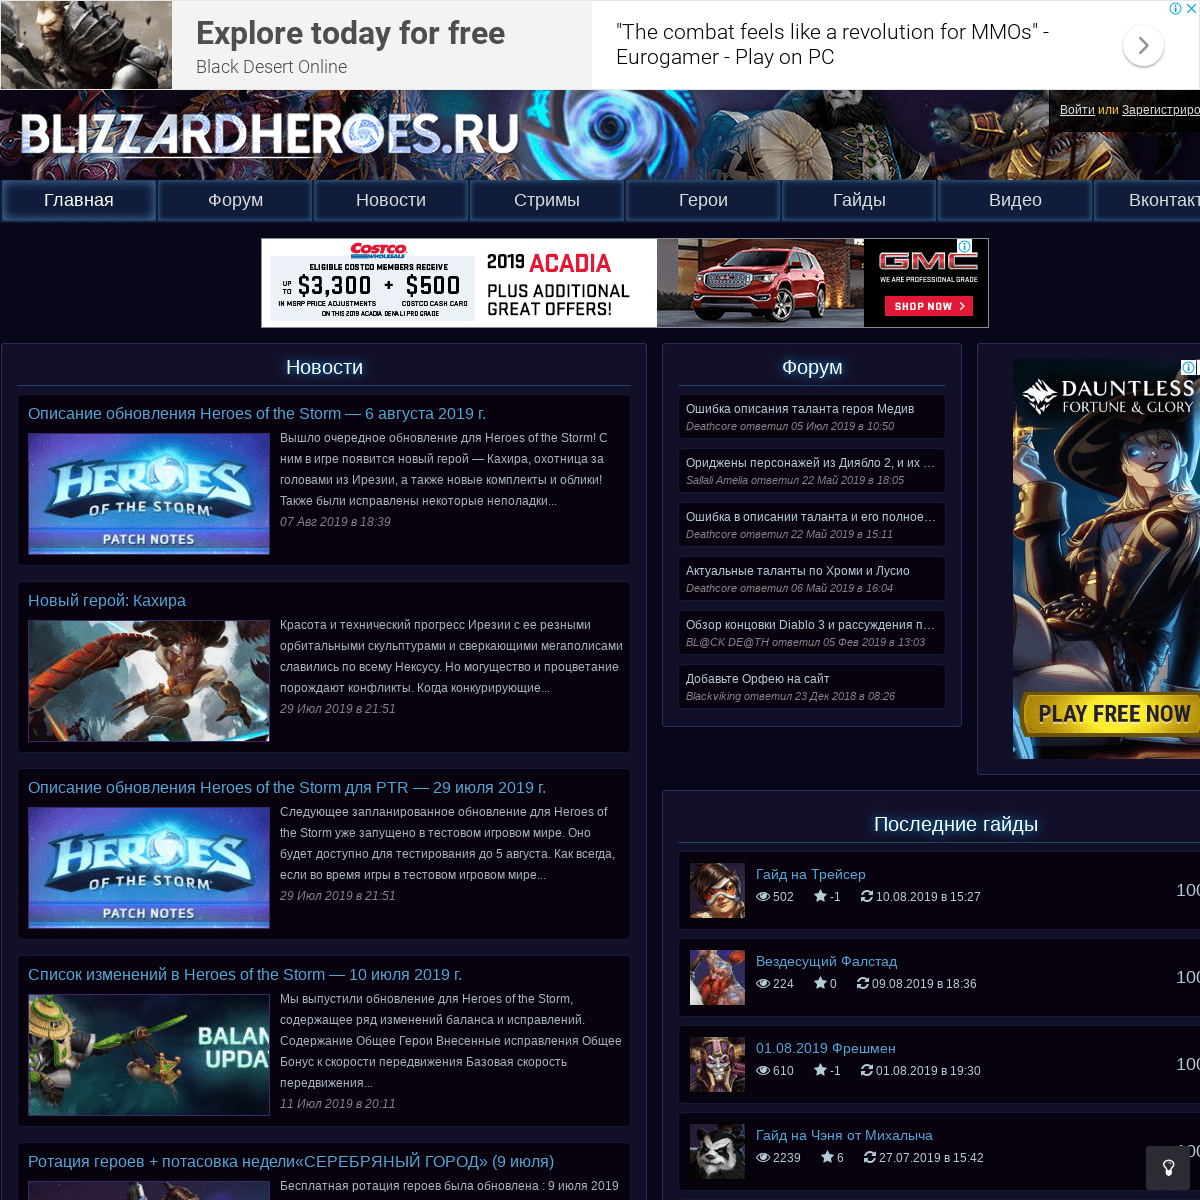 Heroes of the Storm (HOTS)